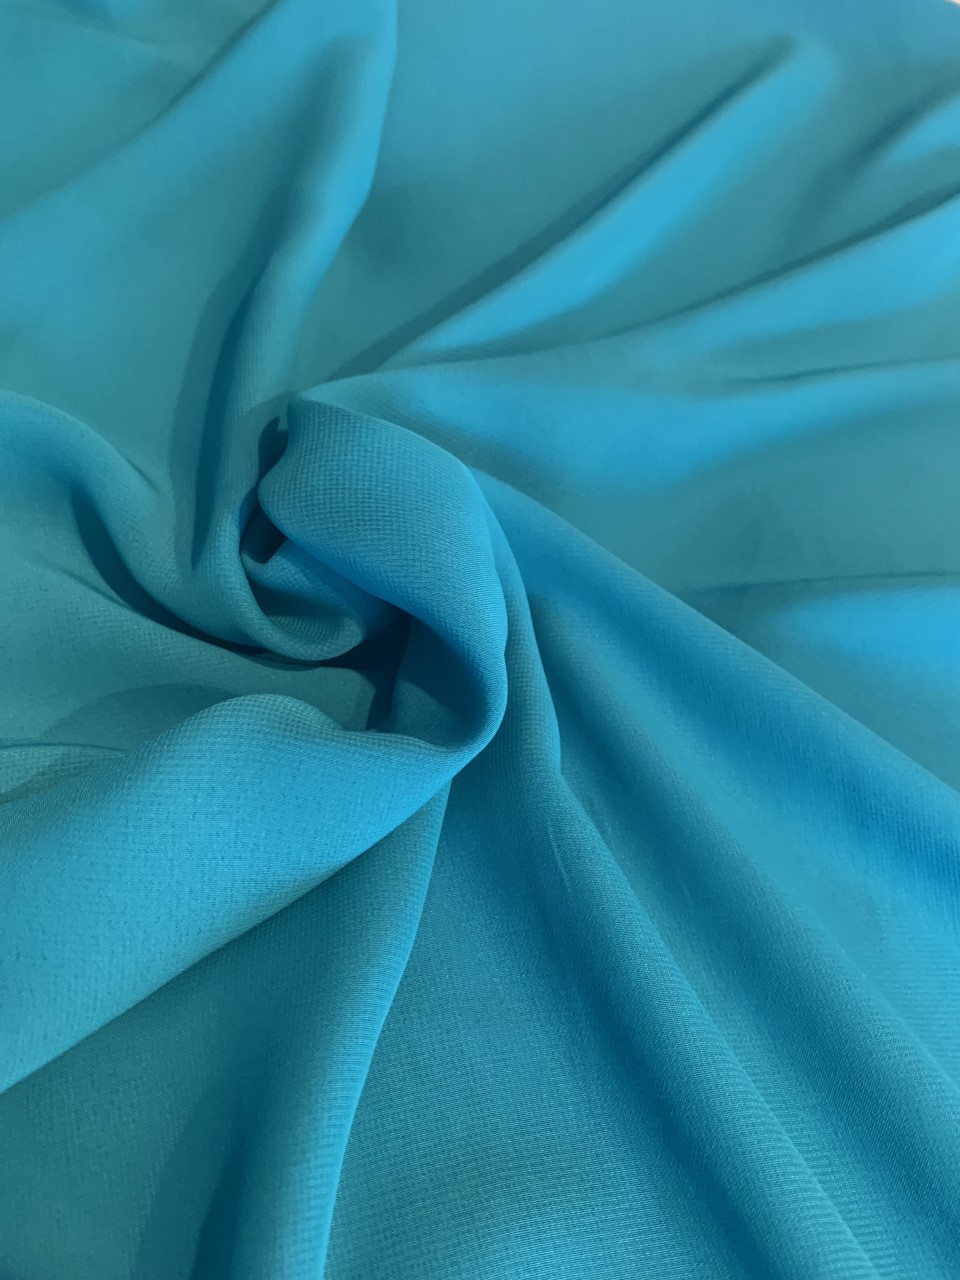 58" Turquoise Chiffon Fabric By The Yard - Polyester